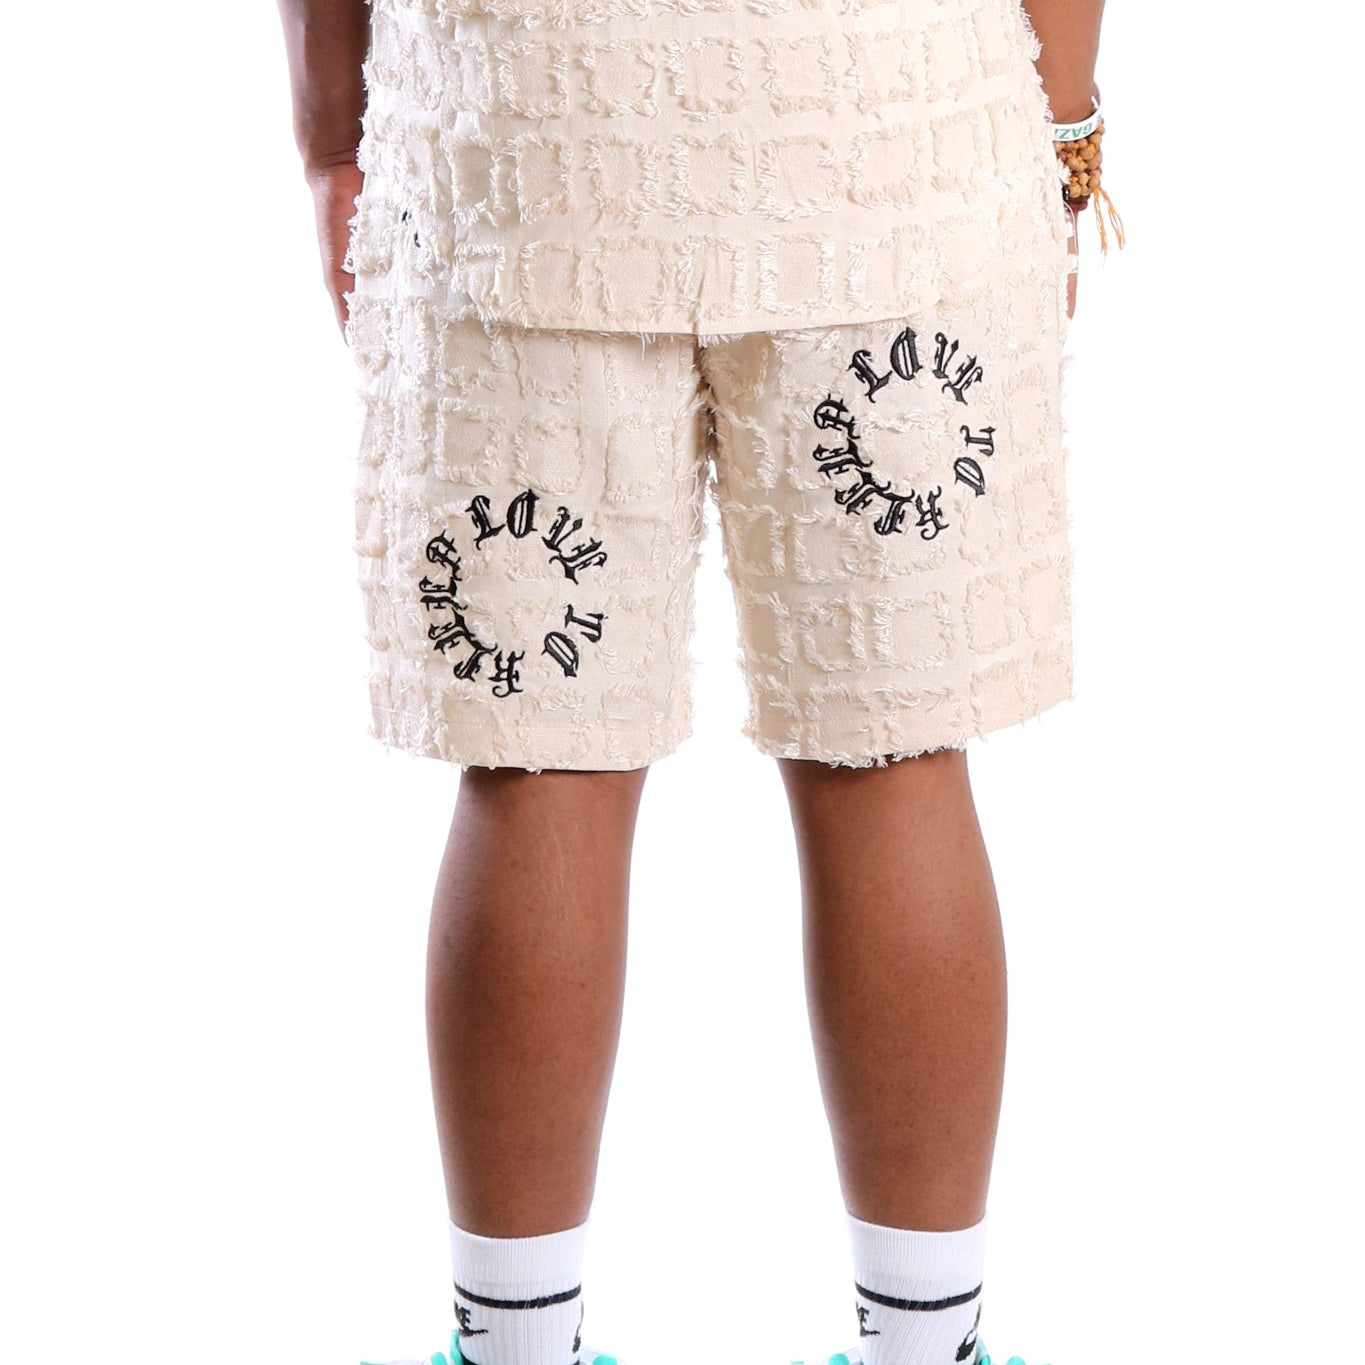 Earth Men's ripped & repaired short pants - Love to KleepMen's Short PantsKLEEPLove to Kleep